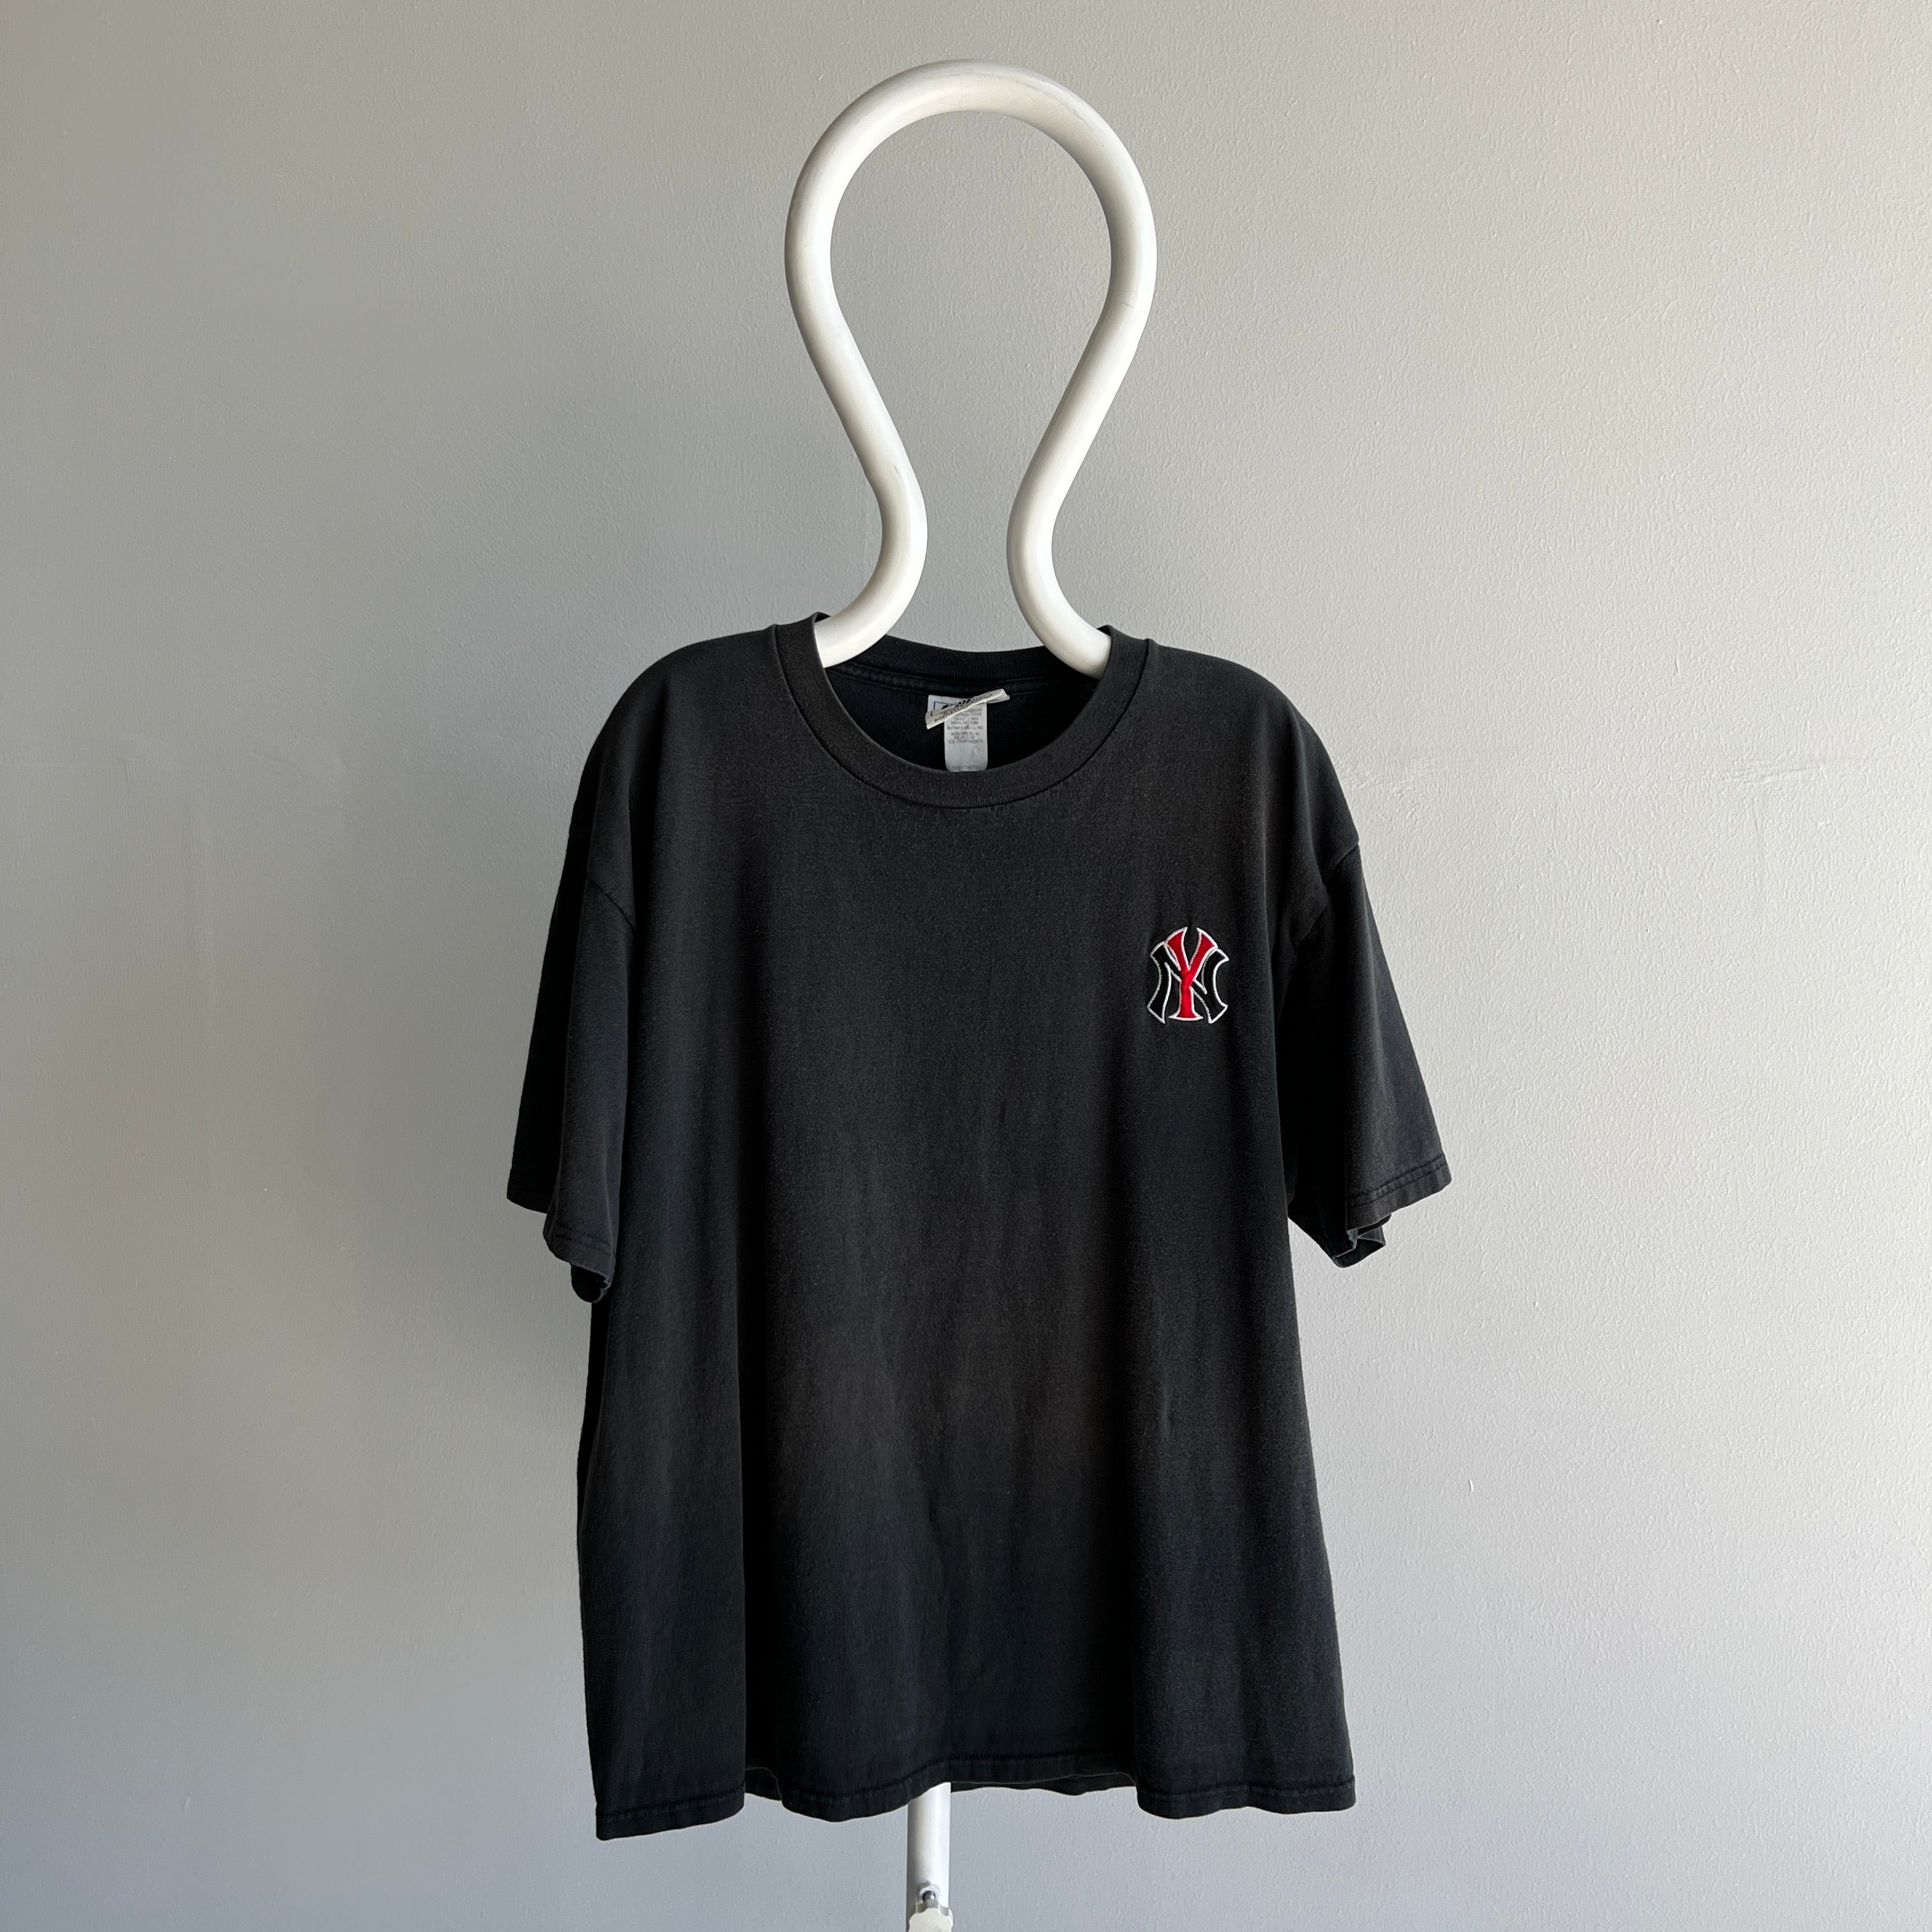 1996 New York Yankees Red and Black Larger T-Shirt